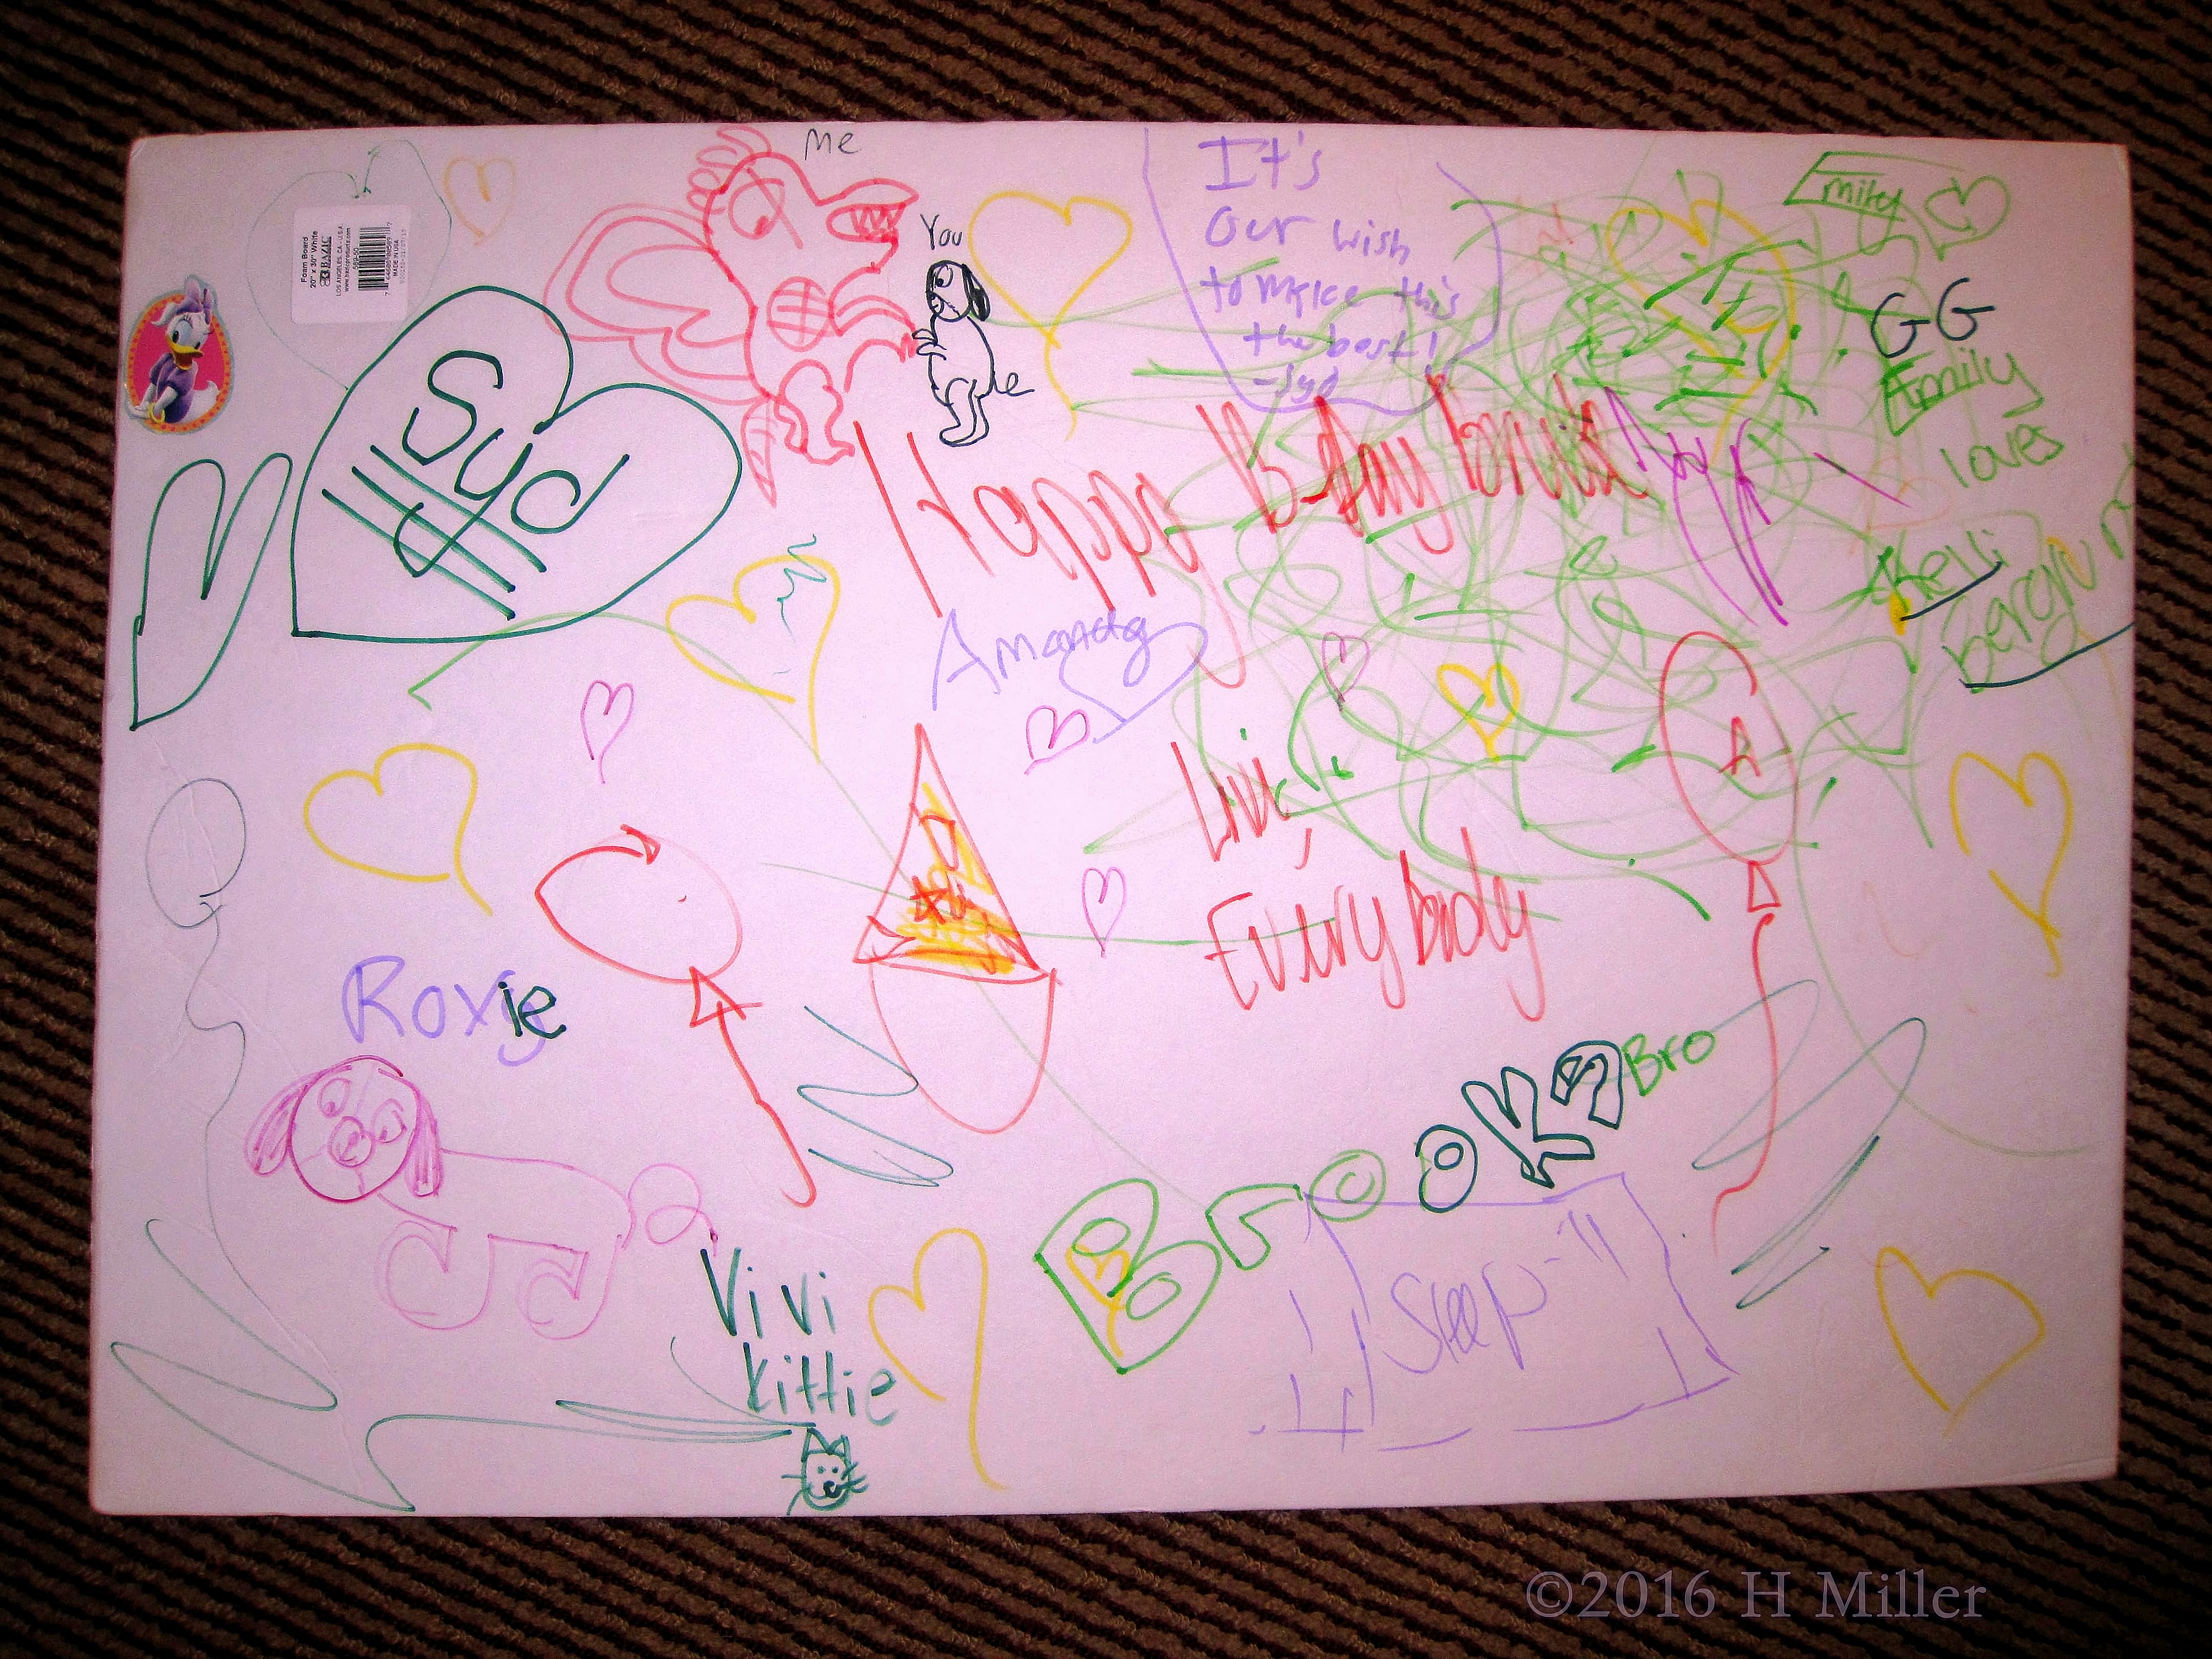 Lovely Messages On The Spa Birthday Card By Brooke's Friends! 